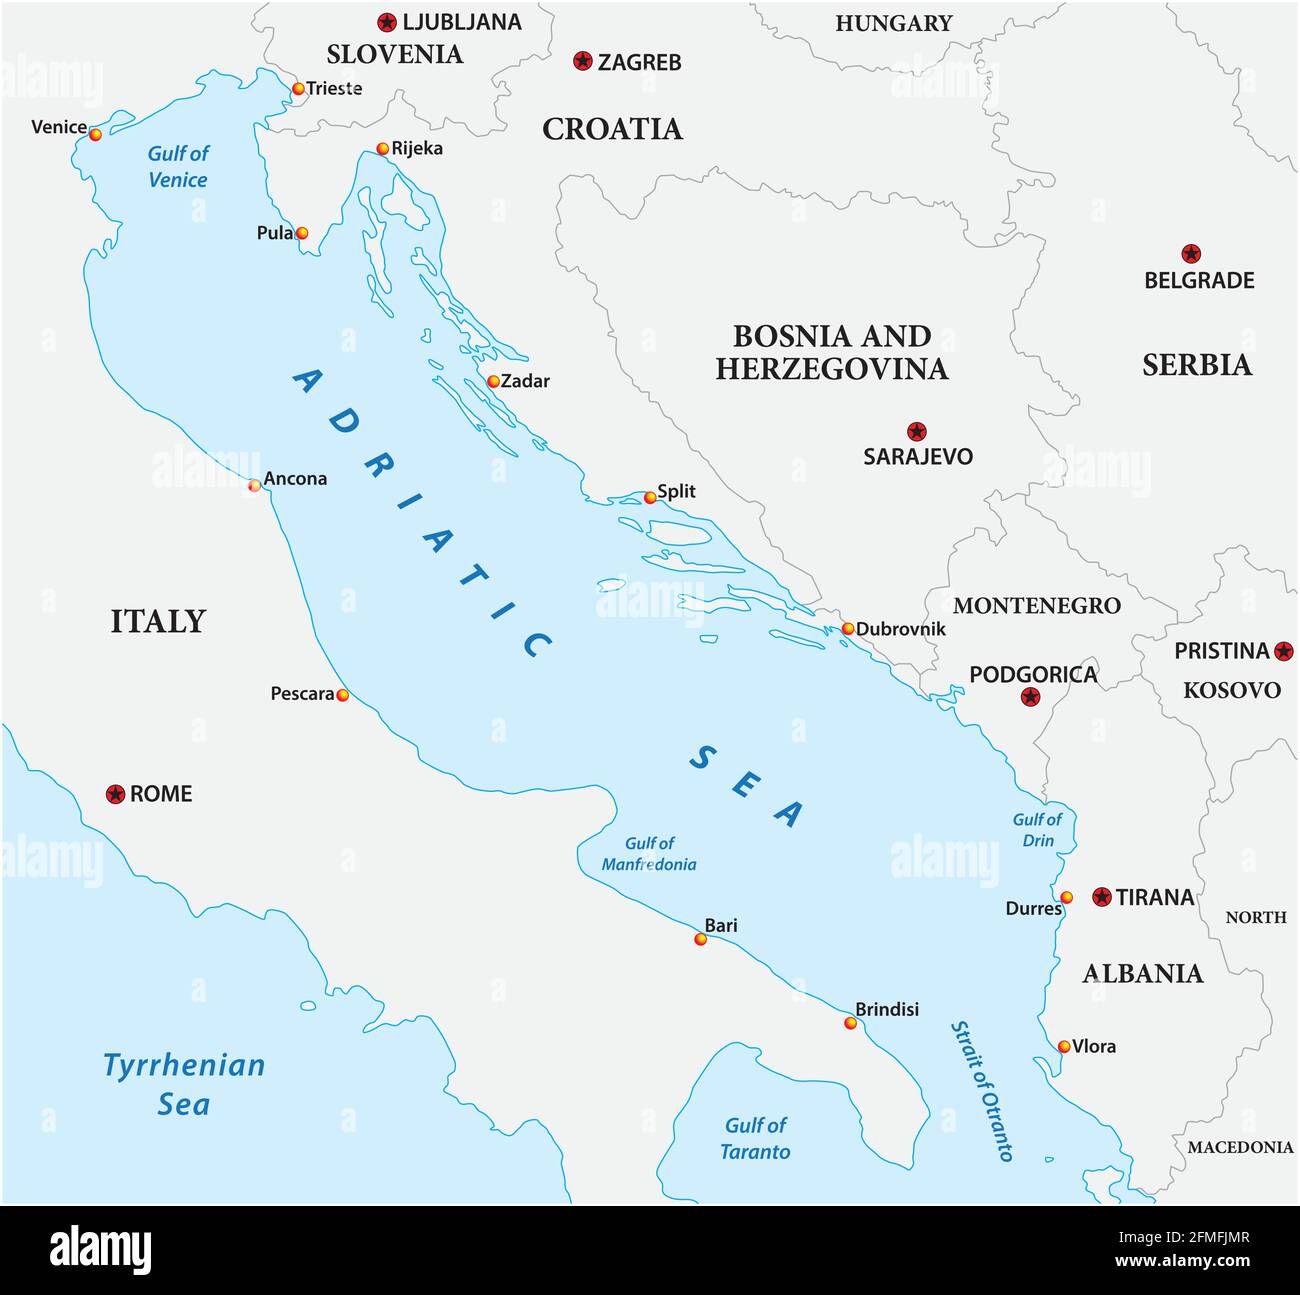 Vector Map Of The Adriatic Sea With Its Neighboring Countries 2FMFJMR 